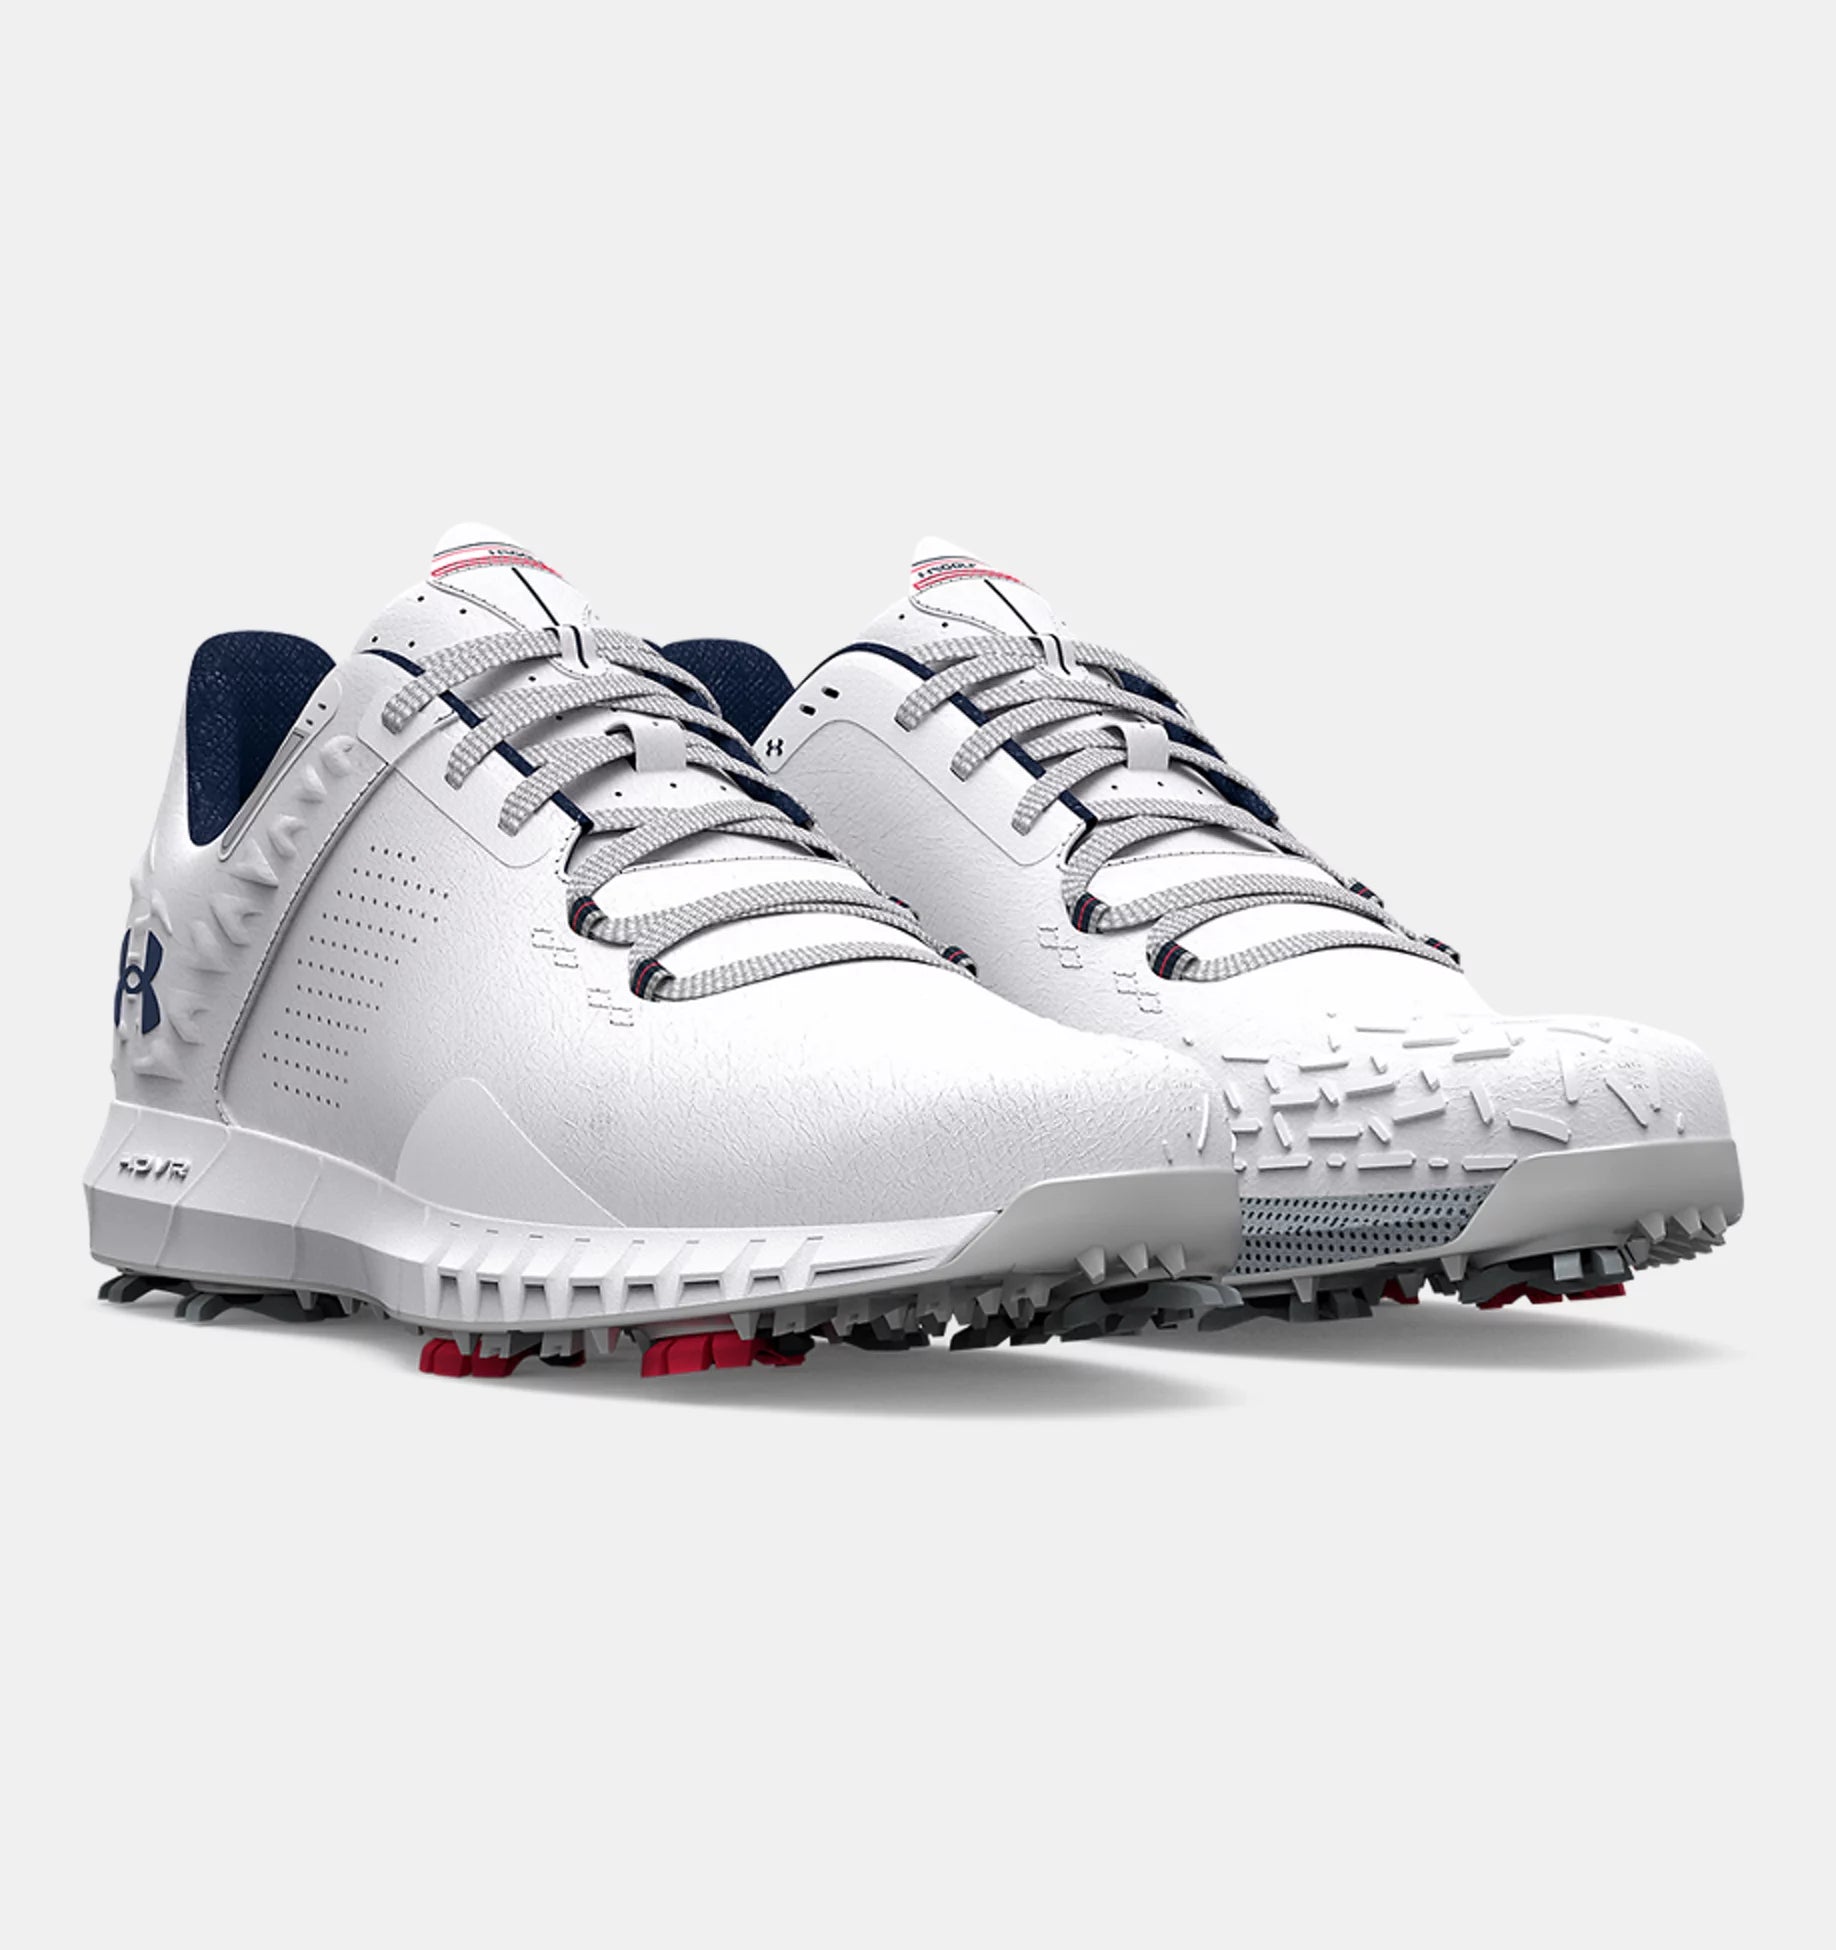 UNDER ARMOUR HOVR DRIVE 2 E GOLF SHOES - WHITE